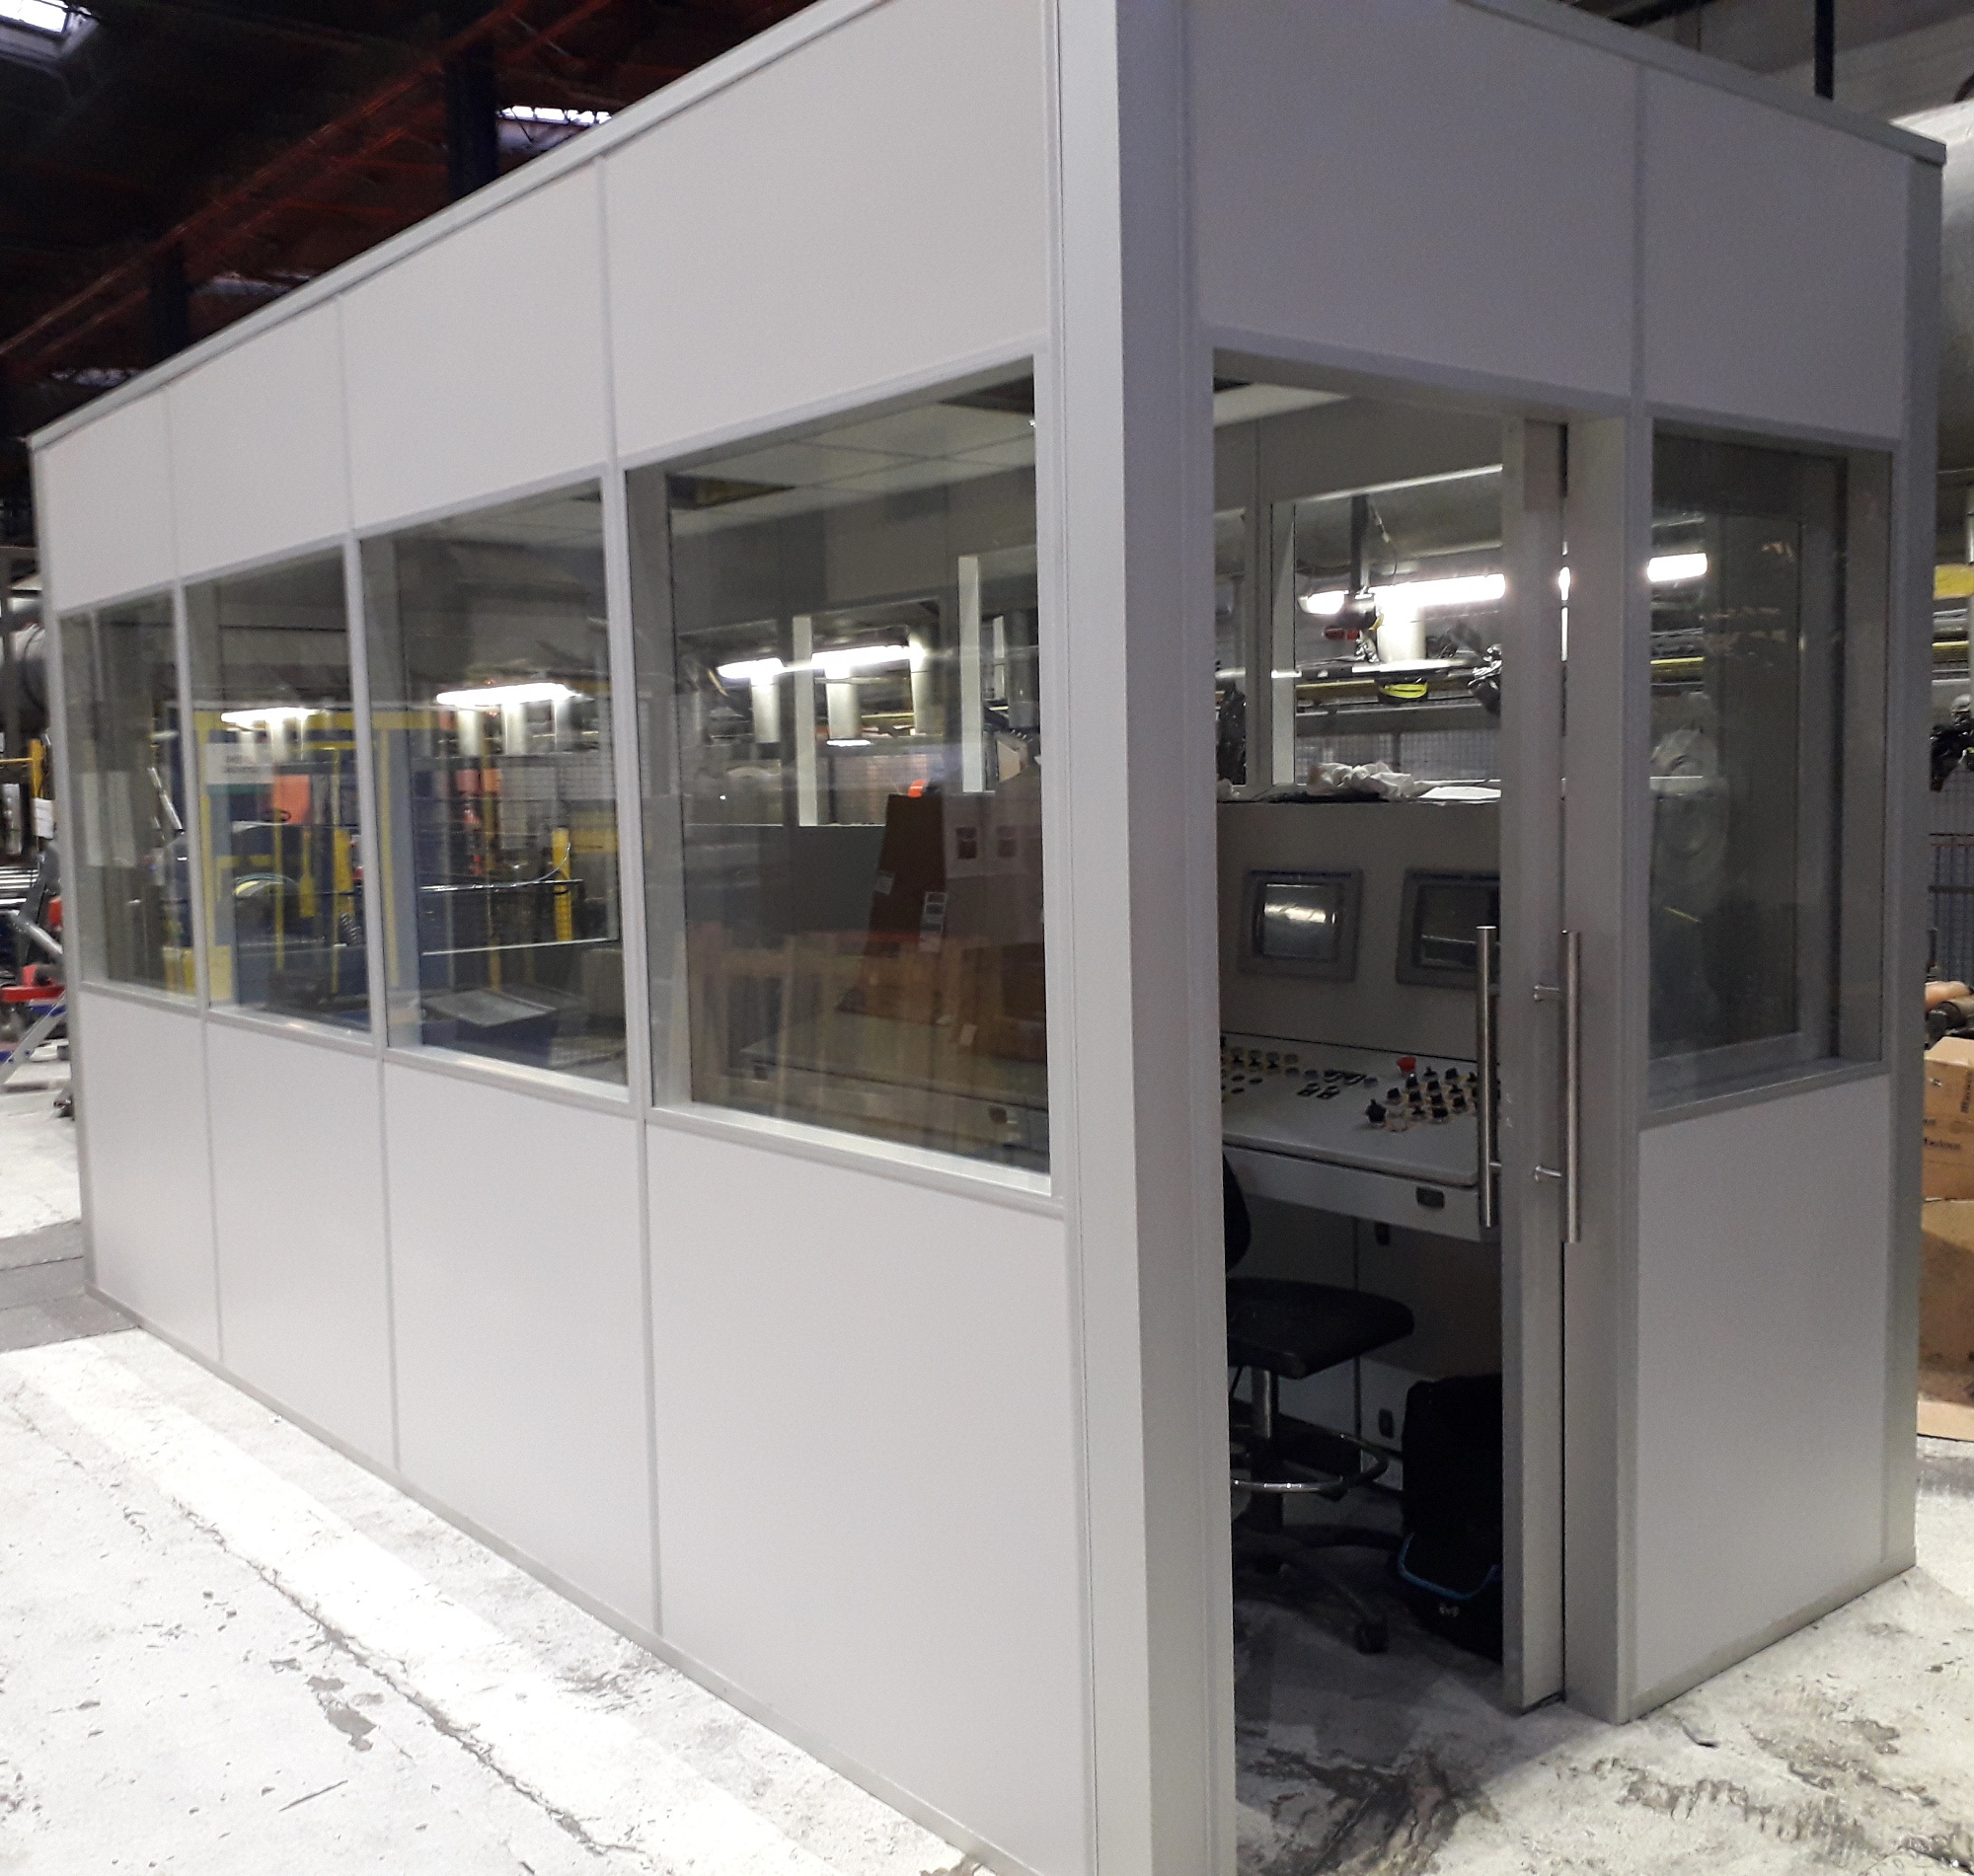 Inhall units for a production facility in Poland